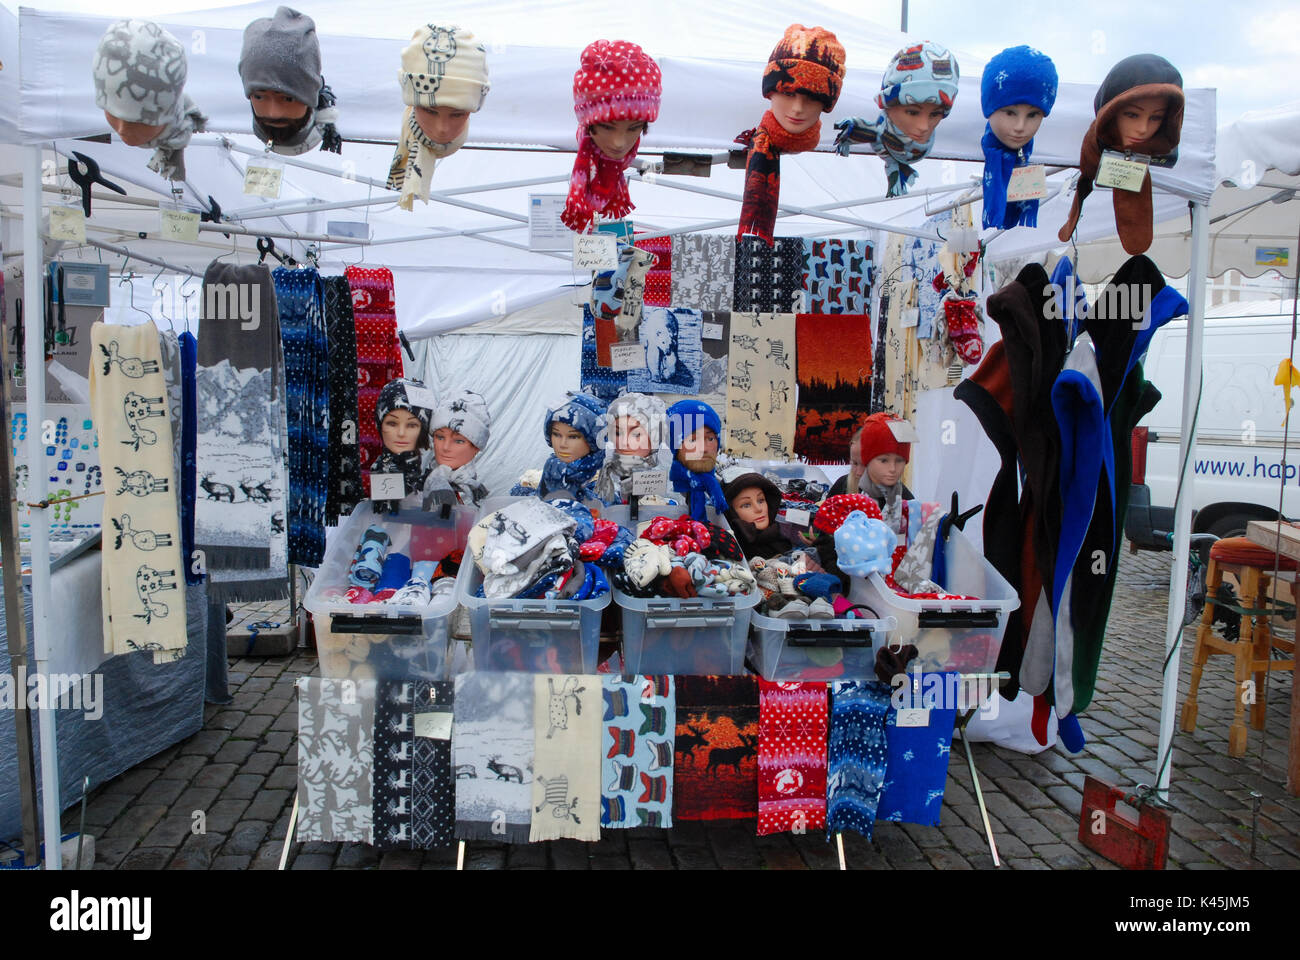 Open-air market stall selling warm hats and scarves in Helsinki, the capital city of Finland Stock Photo